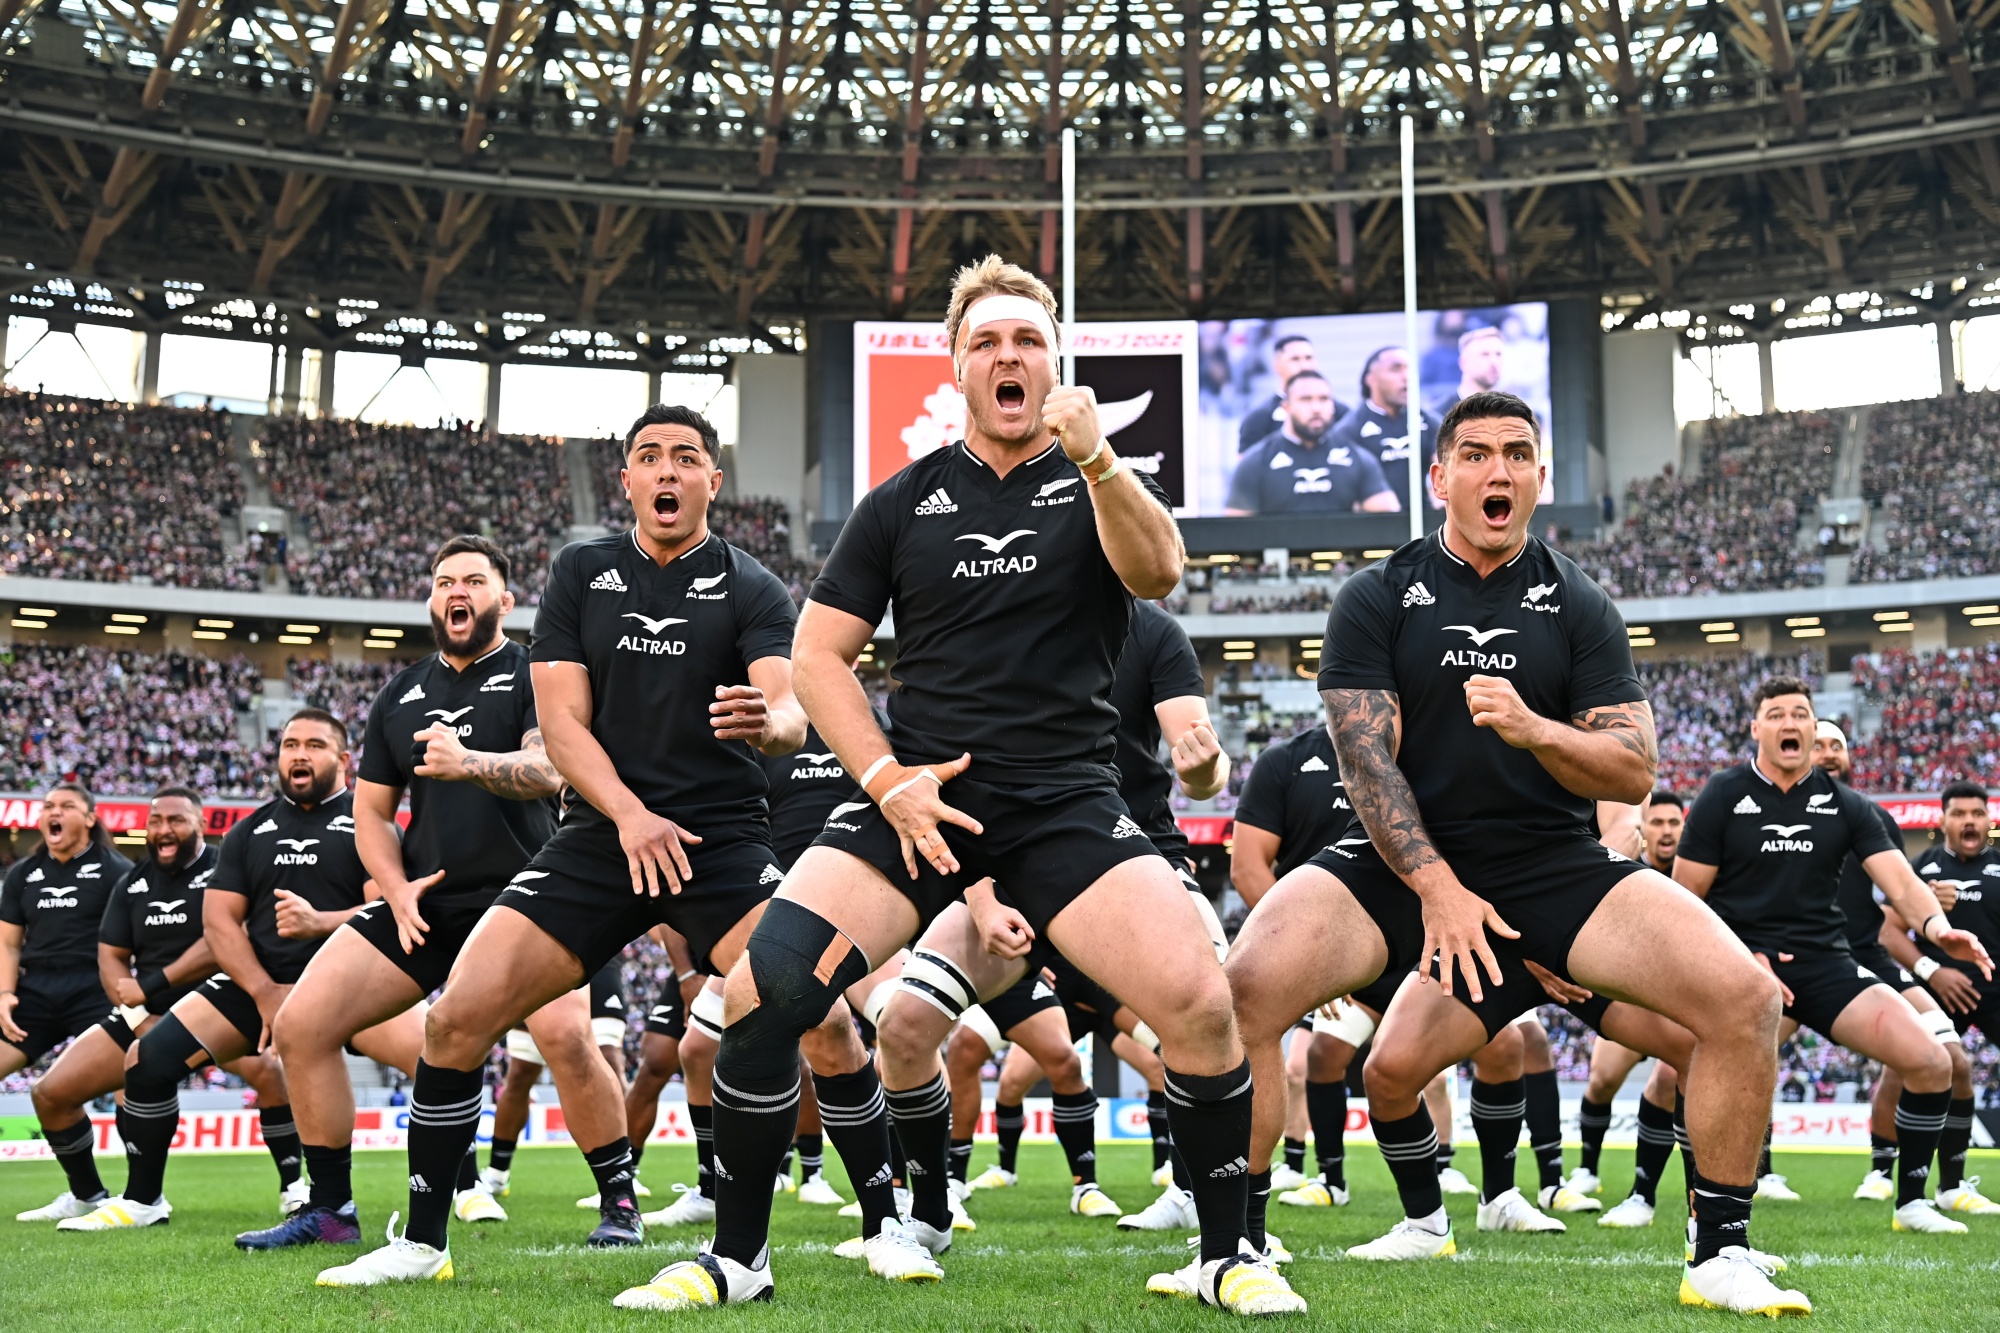 New Zealand All Blacks to Gauge Demand For NZ100m Share Sale Bloomberg